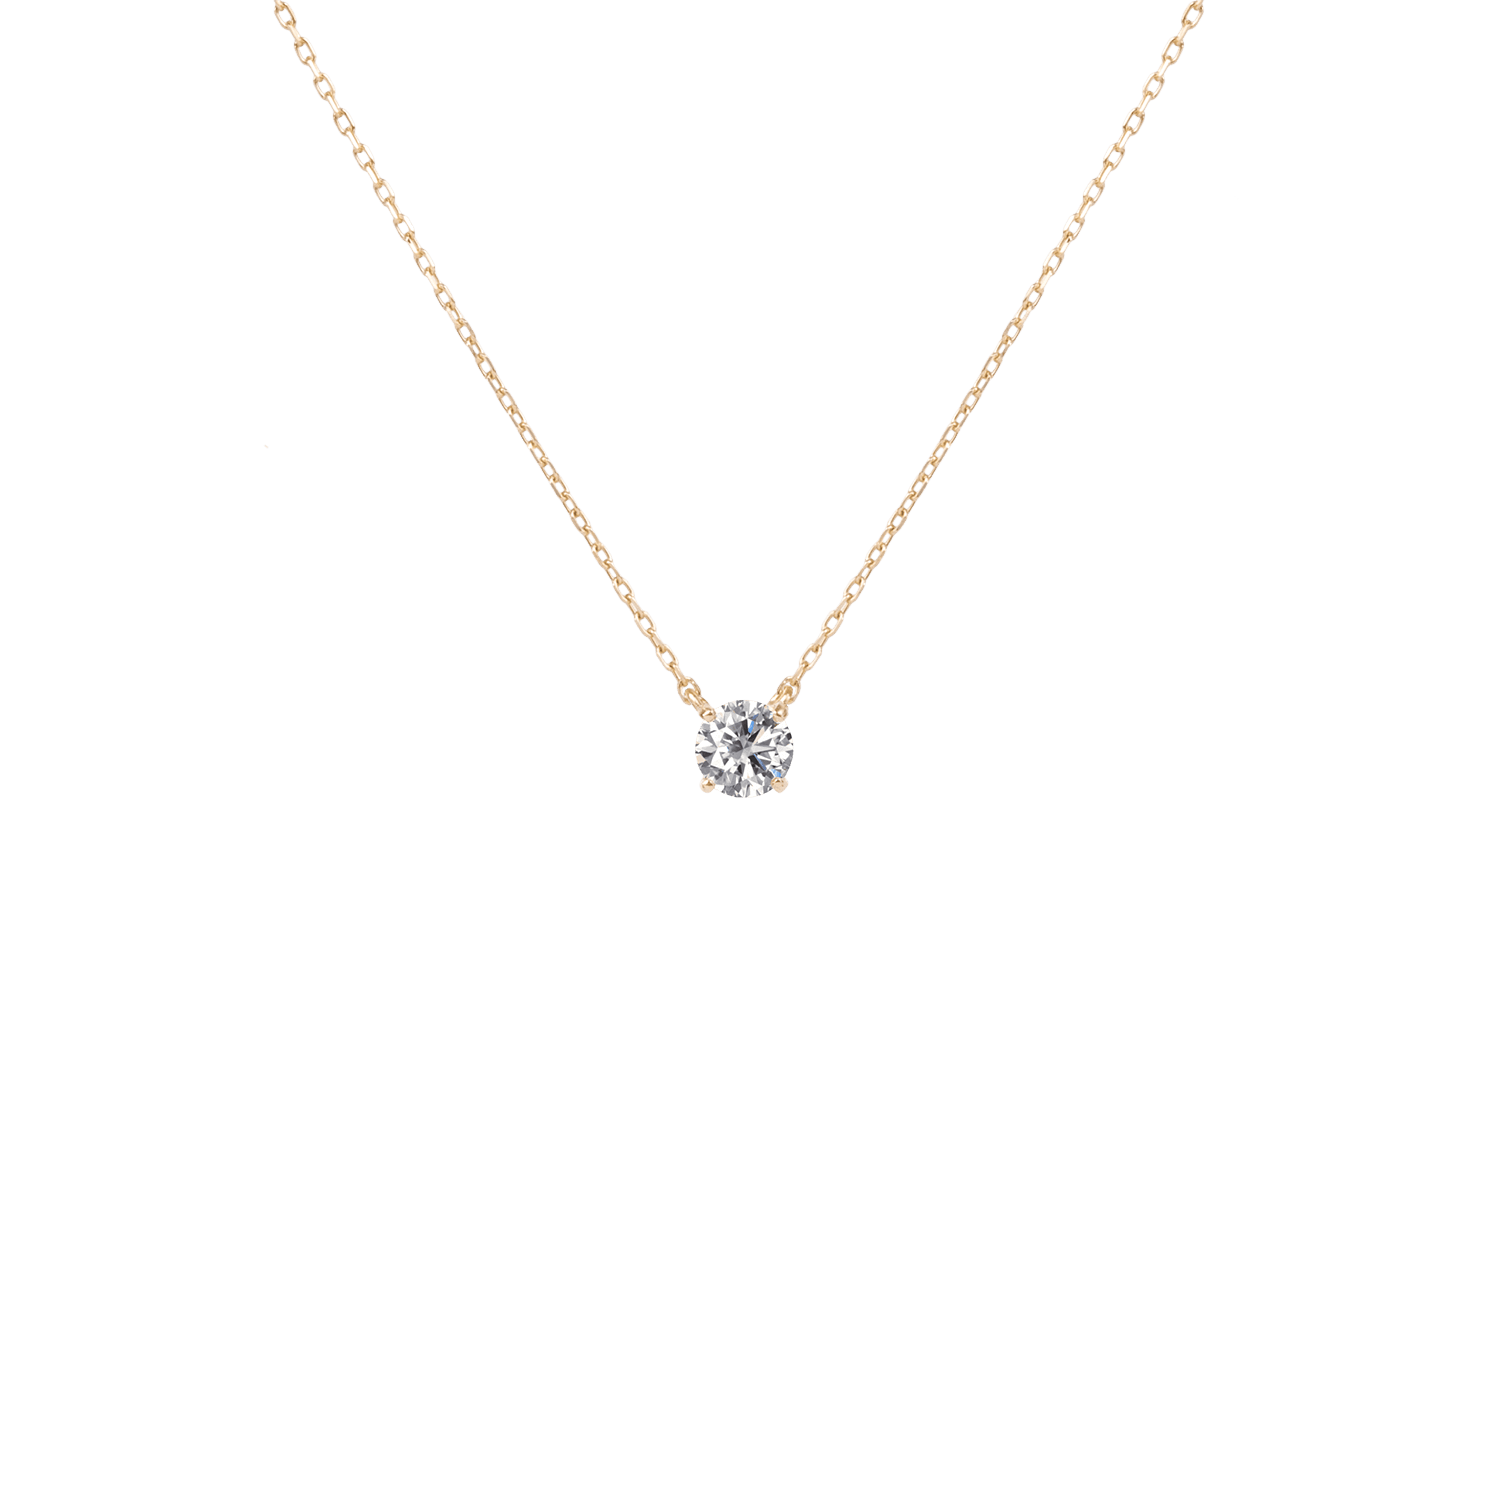 Solitaire Lab-Grown Diamond Necklace | 18K yellow gold / Chain le